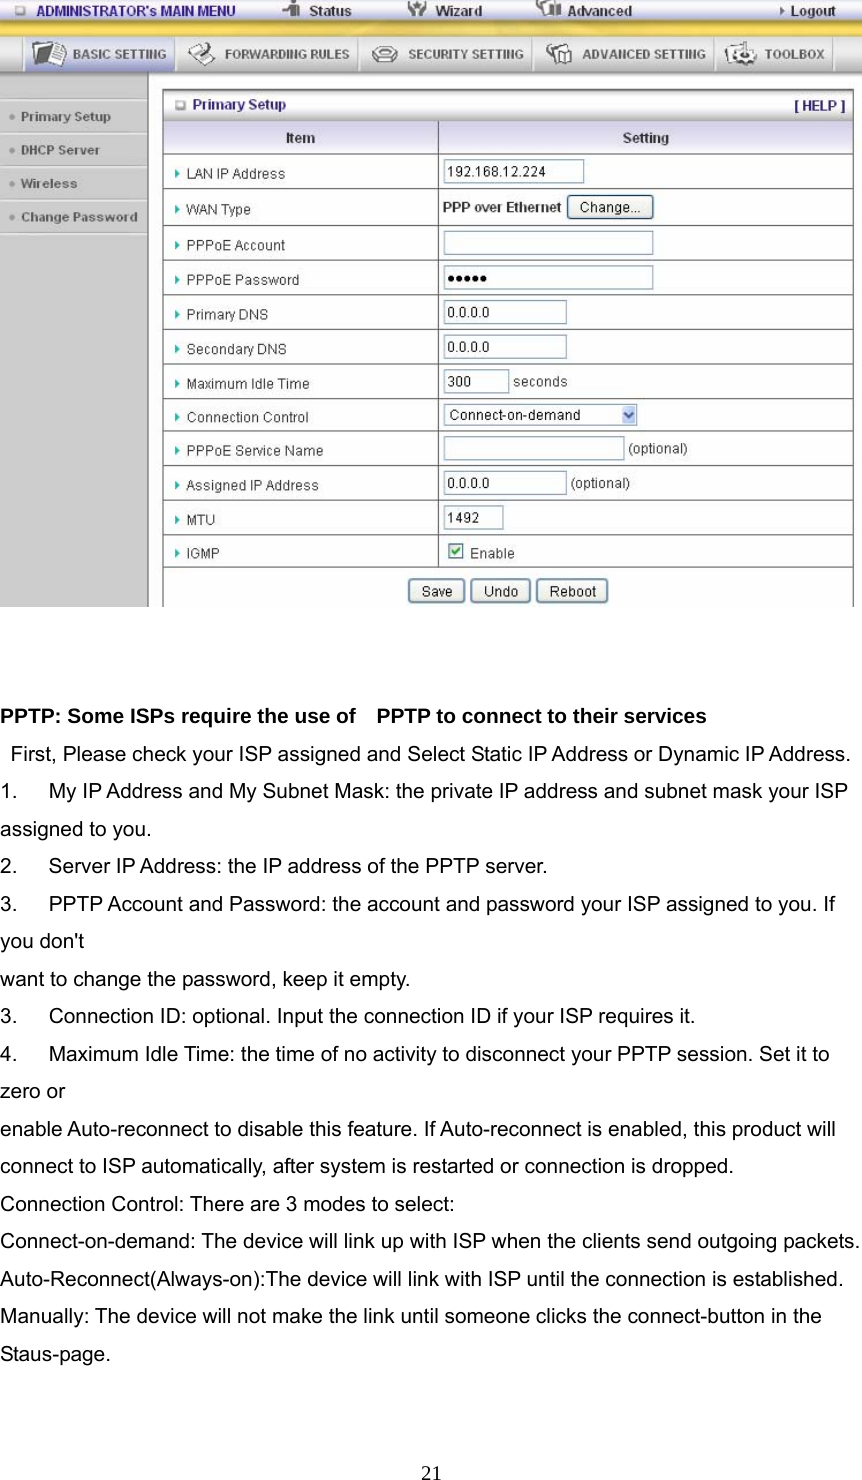  21   PPTP: Some ISPs require the use of    PPTP to connect to their services    First, Please check your ISP assigned and Select Static IP Address or Dynamic IP Address. 1.      My IP Address and My Subnet Mask: the private IP address and subnet mask your ISP assigned to you.   2.    Server IP Address: the IP address of the PPTP server.   3.   PPTP Account and Password: the account and password your ISP assigned to you. If you don&apos;t want to change the password, keep it empty.   3.      Connection ID: optional. Input the connection ID if your ISP requires it.   4.      Maximum Idle Time: the time of no activity to disconnect your PPTP session. Set it to zero or   enable Auto-reconnect to disable this feature. If Auto-reconnect is enabled, this product will   connect to ISP automatically, after system is restarted or connection is dropped. Connection Control: There are 3 modes to select: Connect-on-demand: The device will link up with ISP when the clients send outgoing packets. Auto-Reconnect(Always-on):The device will link with ISP until the connection is established. Manually: The device will not make the link until someone clicks the connect-button in the Staus-page.  